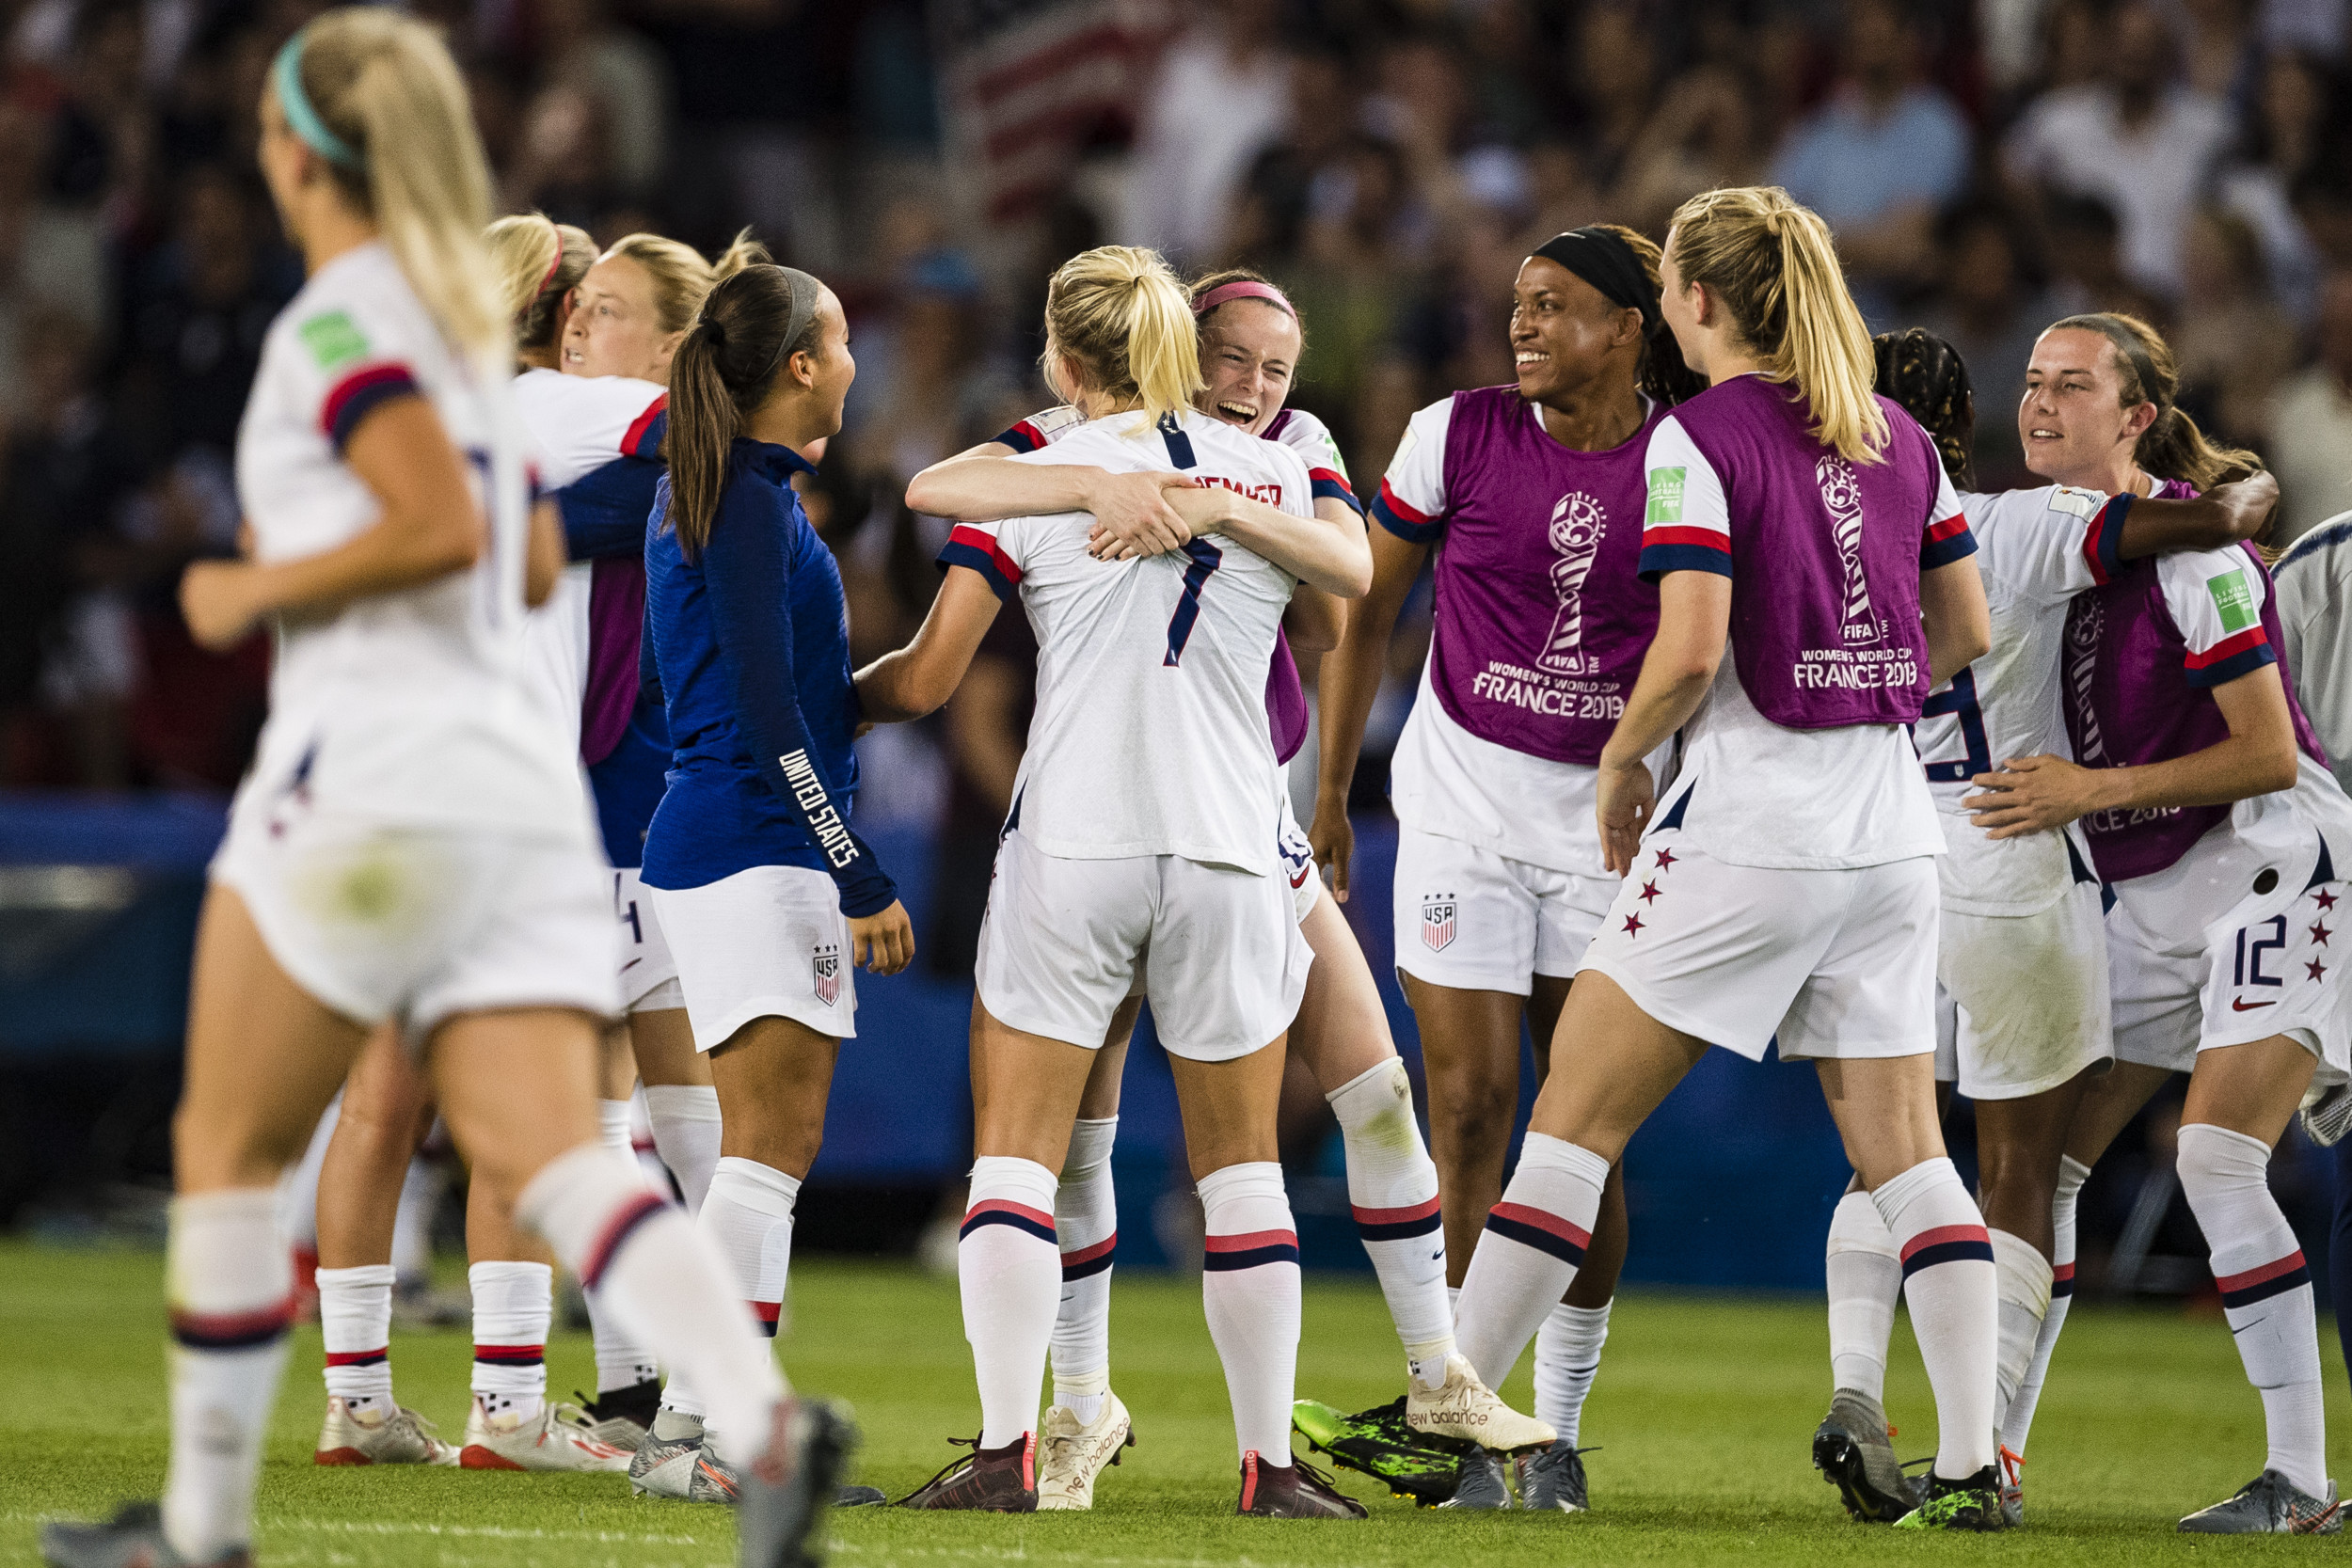 Proud parents and partners go wild as US Women's Soccer Team wins